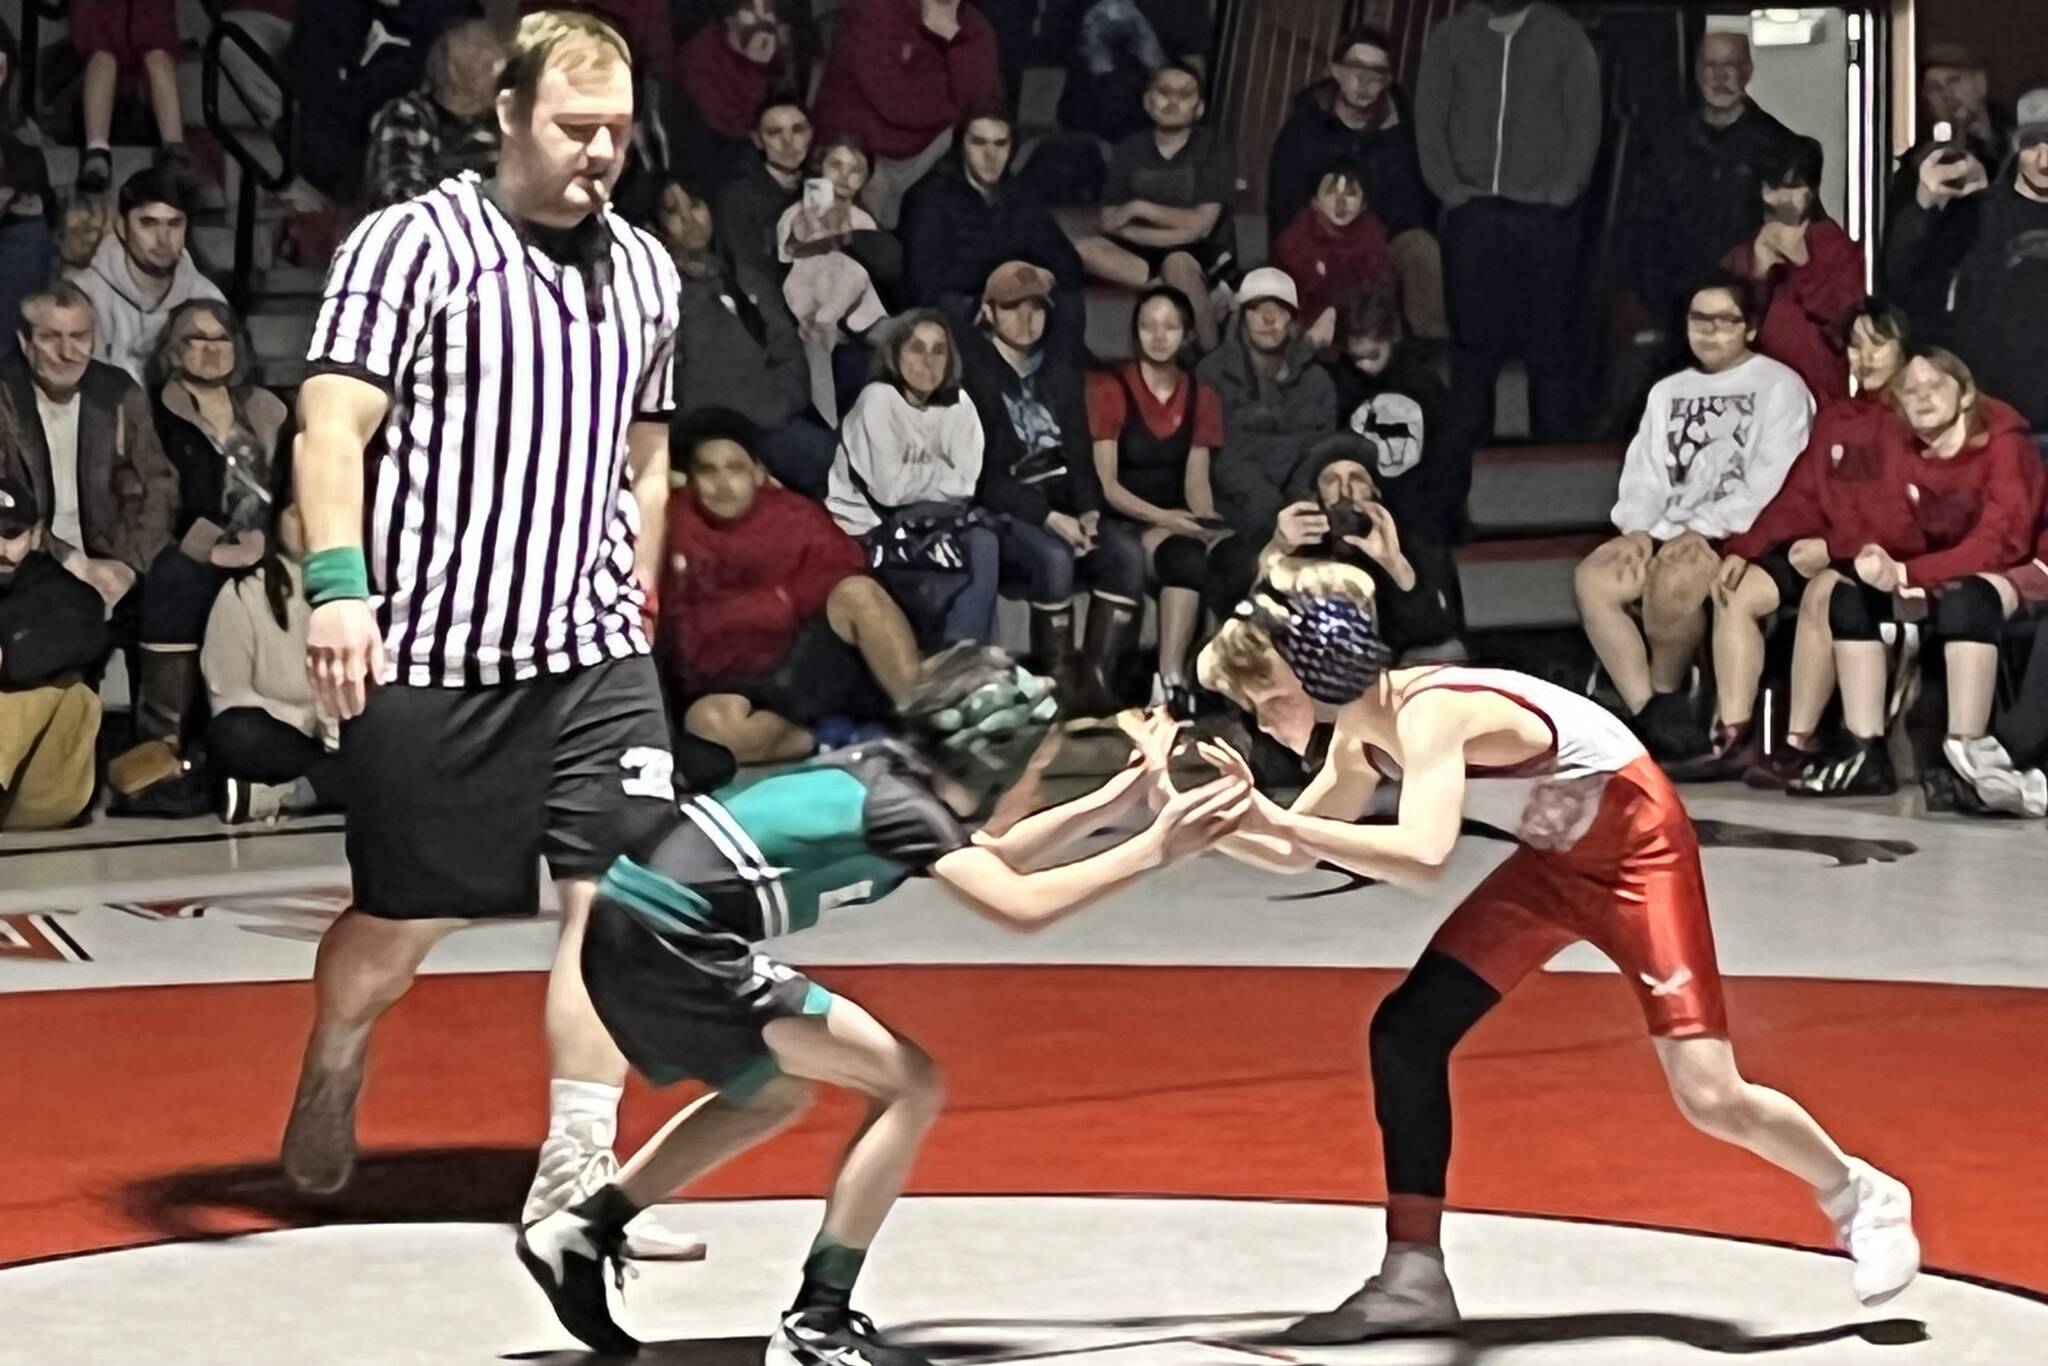 Caleb Scussel from Floyd Dryden Middle School and Luke Bell from Haines Glacier Bears square off against each other for the first of the final matches for this year’s Southeast Alaska Middle School Regional Wrestling Tournament on Saturday at Floyd Dryden Middle School. (Jonson Kuhn / Juneau Empire)